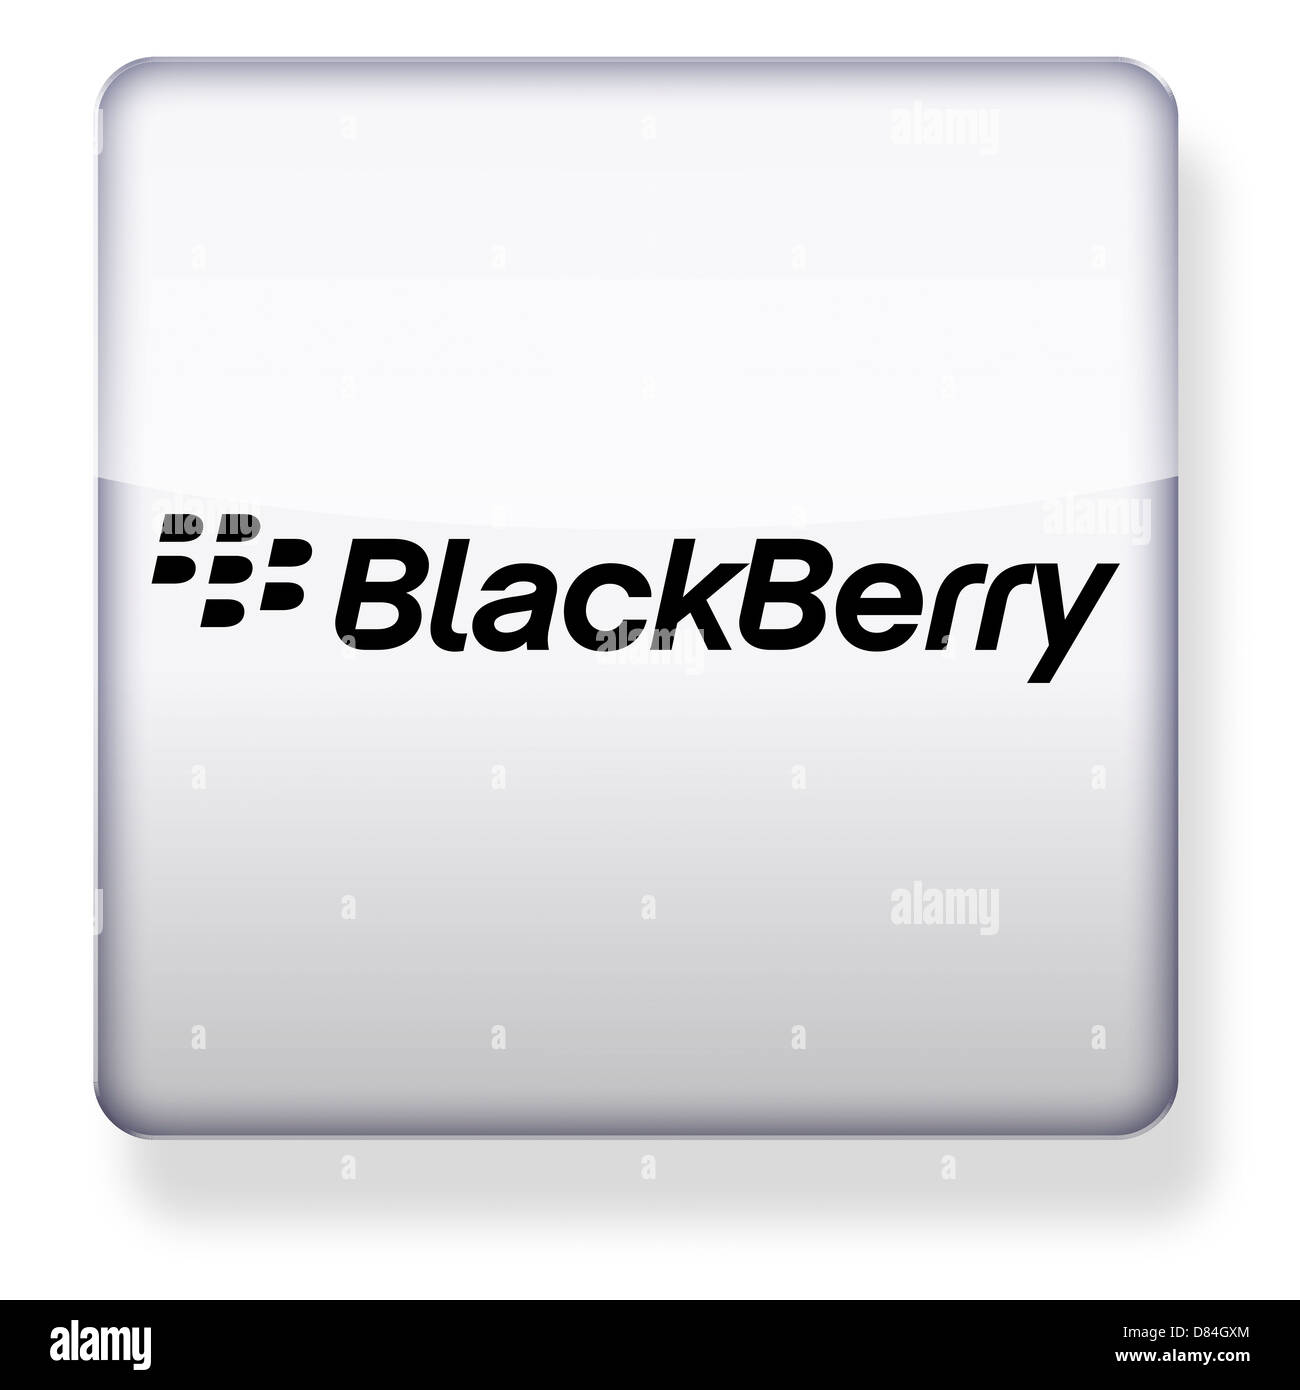 BlackBerry logo as an app icon. Clipping path included. Stock Photo